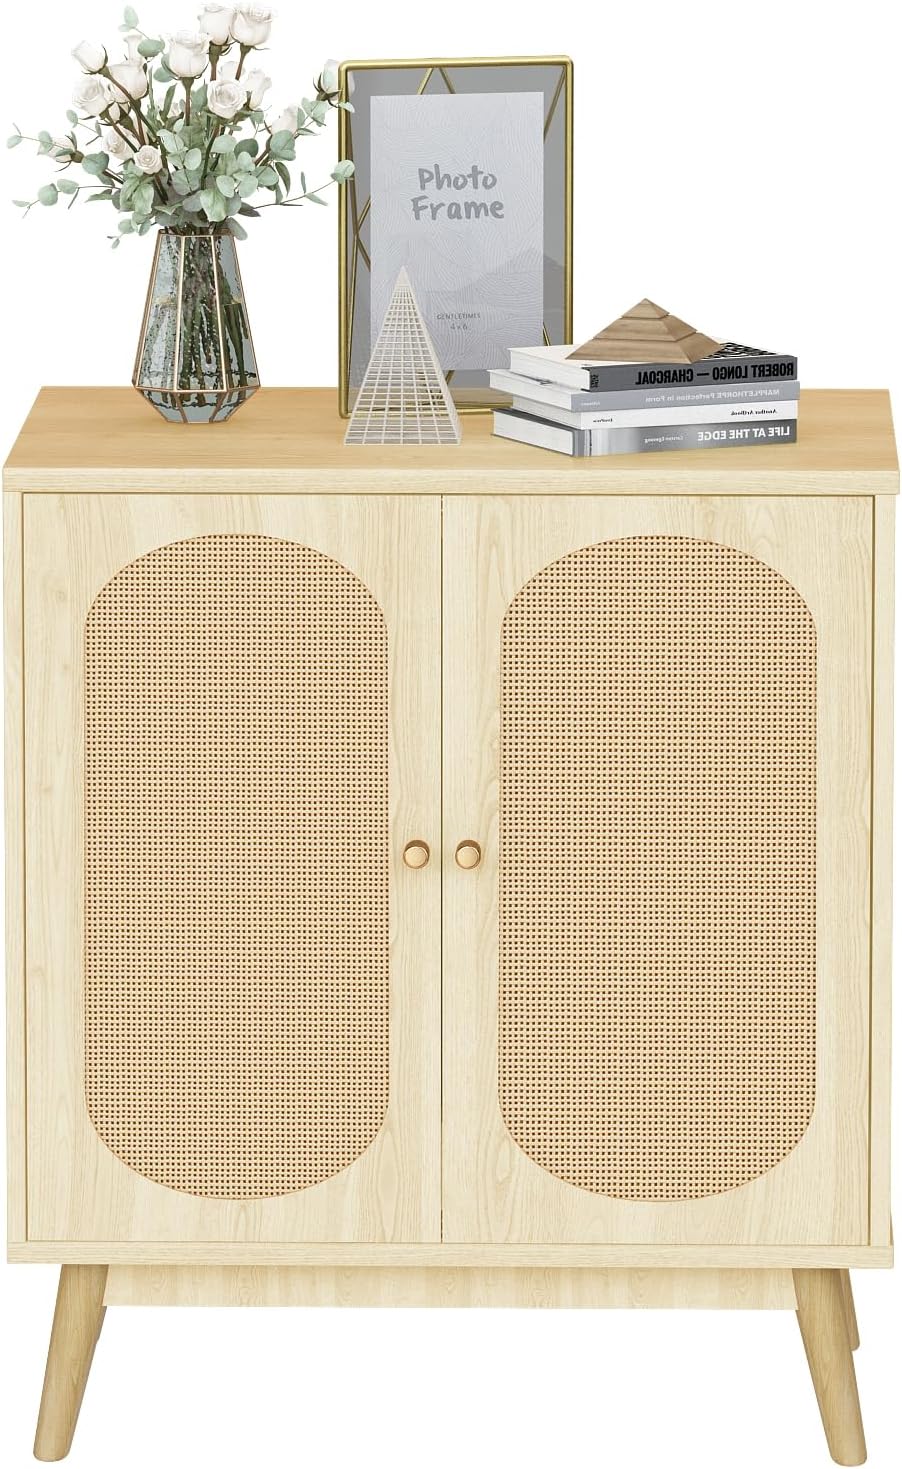 This is a beautiful cabinet! Great quality and easy too put together. I swapped out the handles with some that matched another piece I have a little better but the ones provided were cute. Excellent quality for the price.